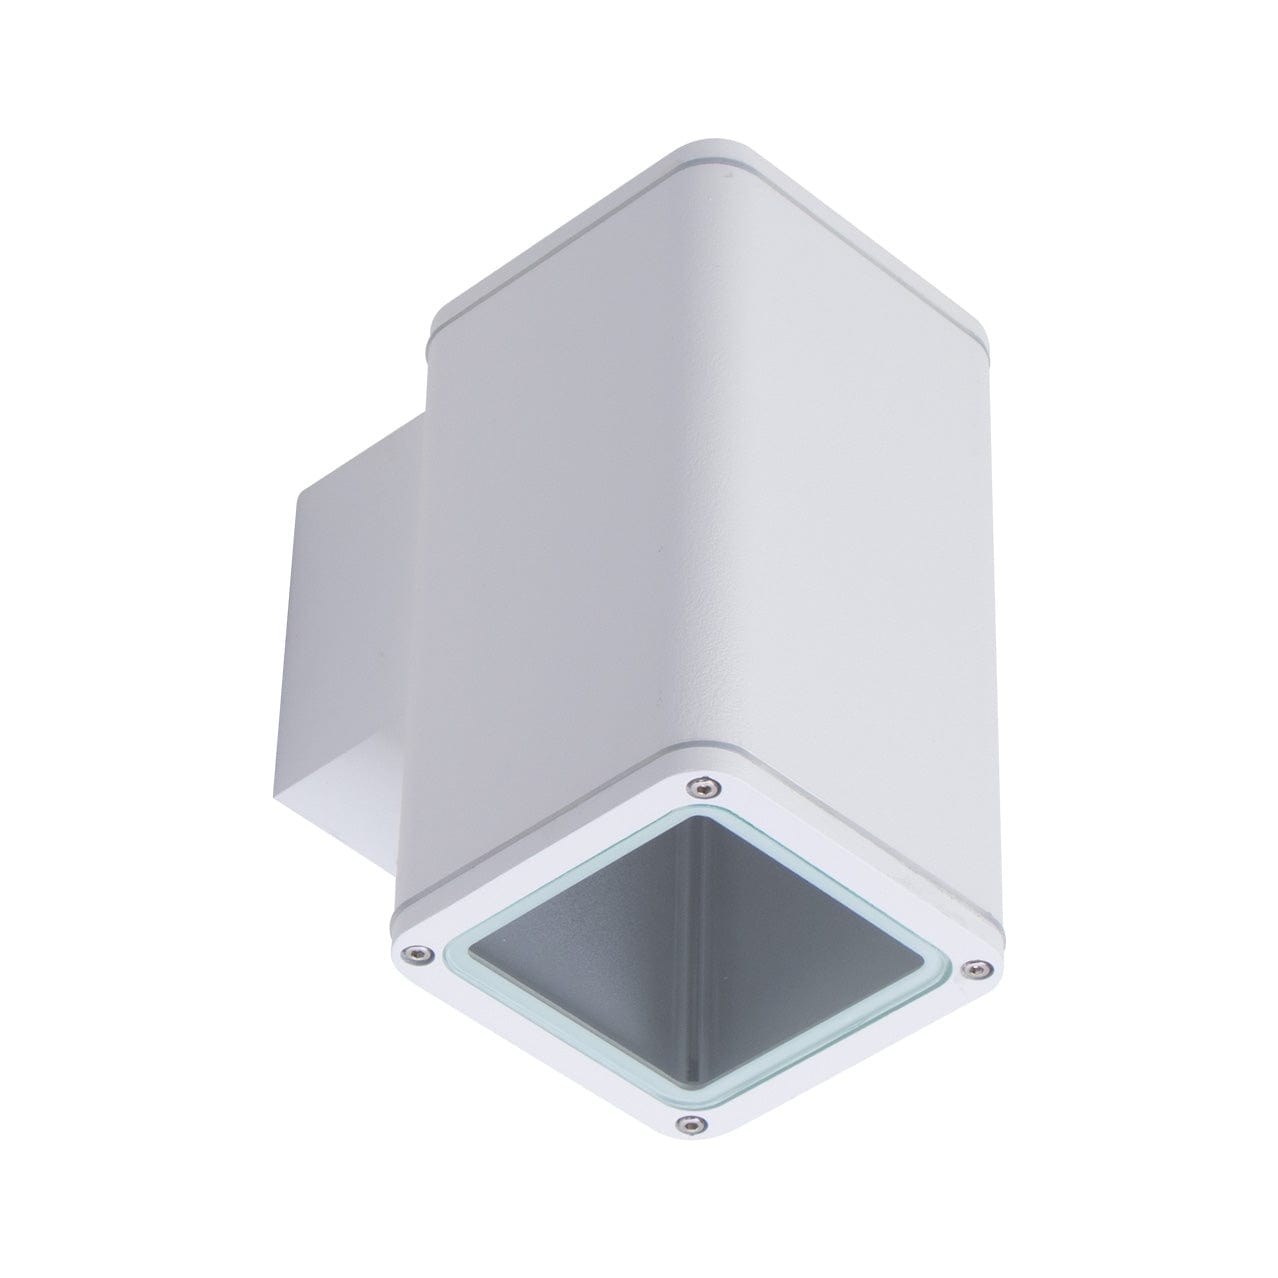 Domus Lighting Outdoor Wall Lights WHITE / NO LAMP DOMUS PIPER-1 SQUARE LED WALL LIGHT Lights-For-You 49266